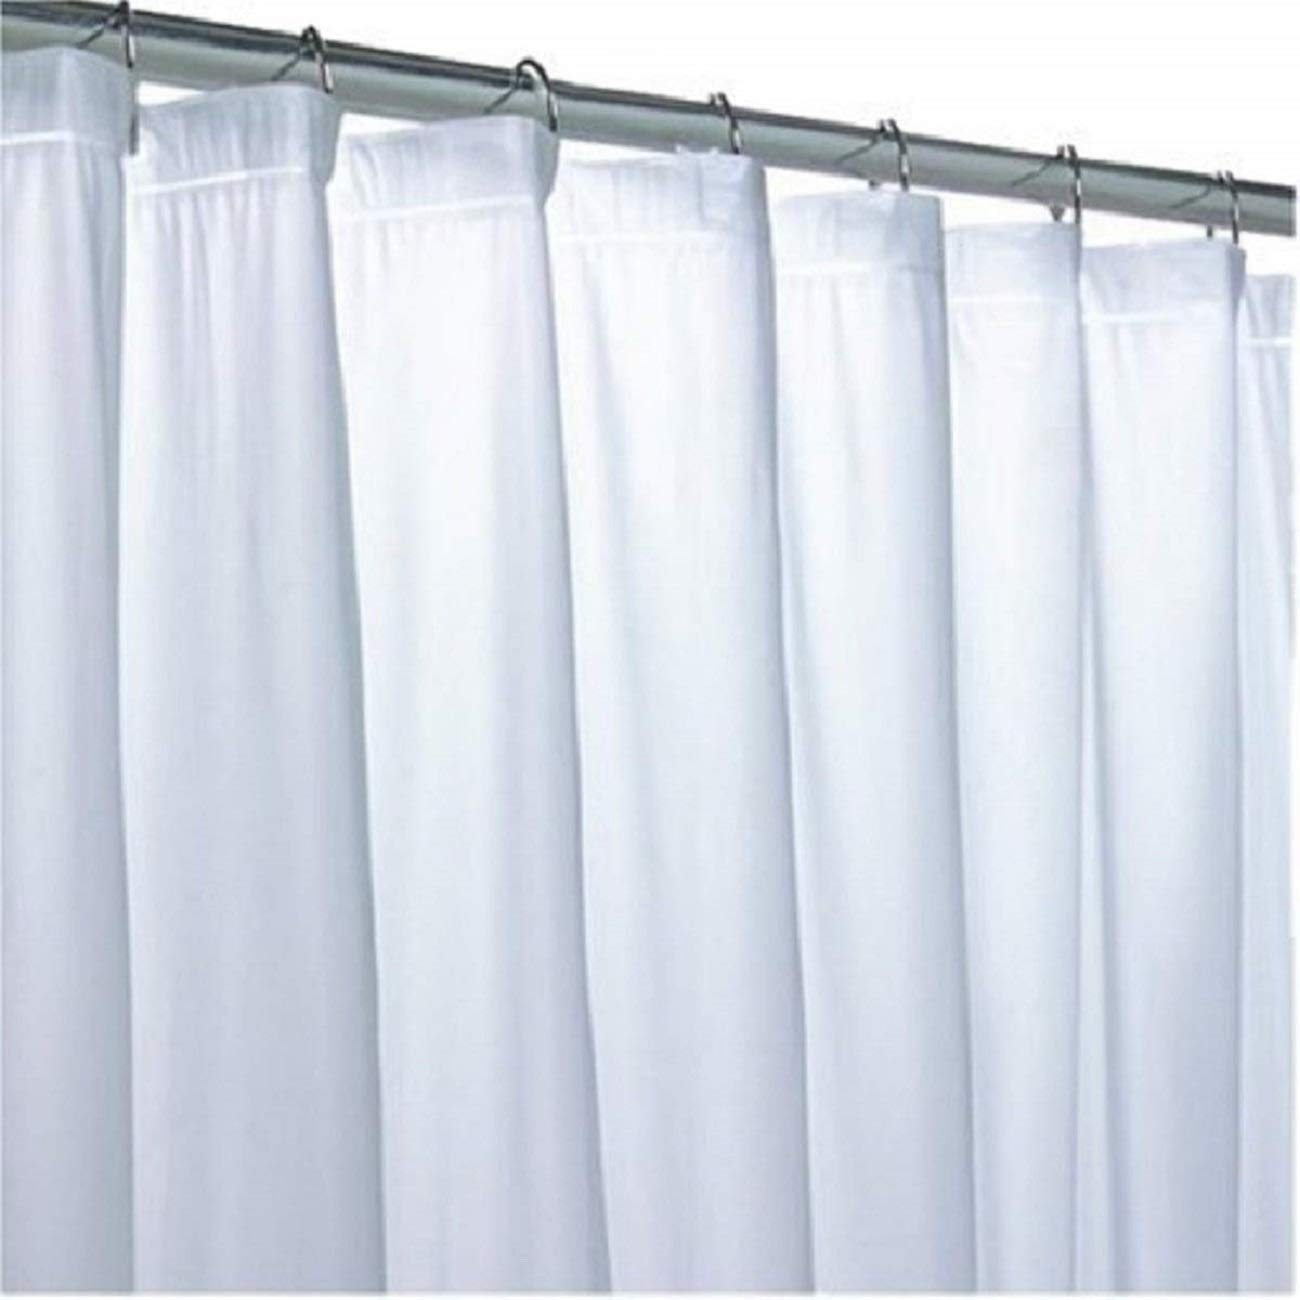 Kuber Industries Polyvinyl Chloride AC Curtain|Eyelet Rings & WaterProof Material|Size 274 x 134 x 1 CM (Transparent),Printed,Grommet Curtains